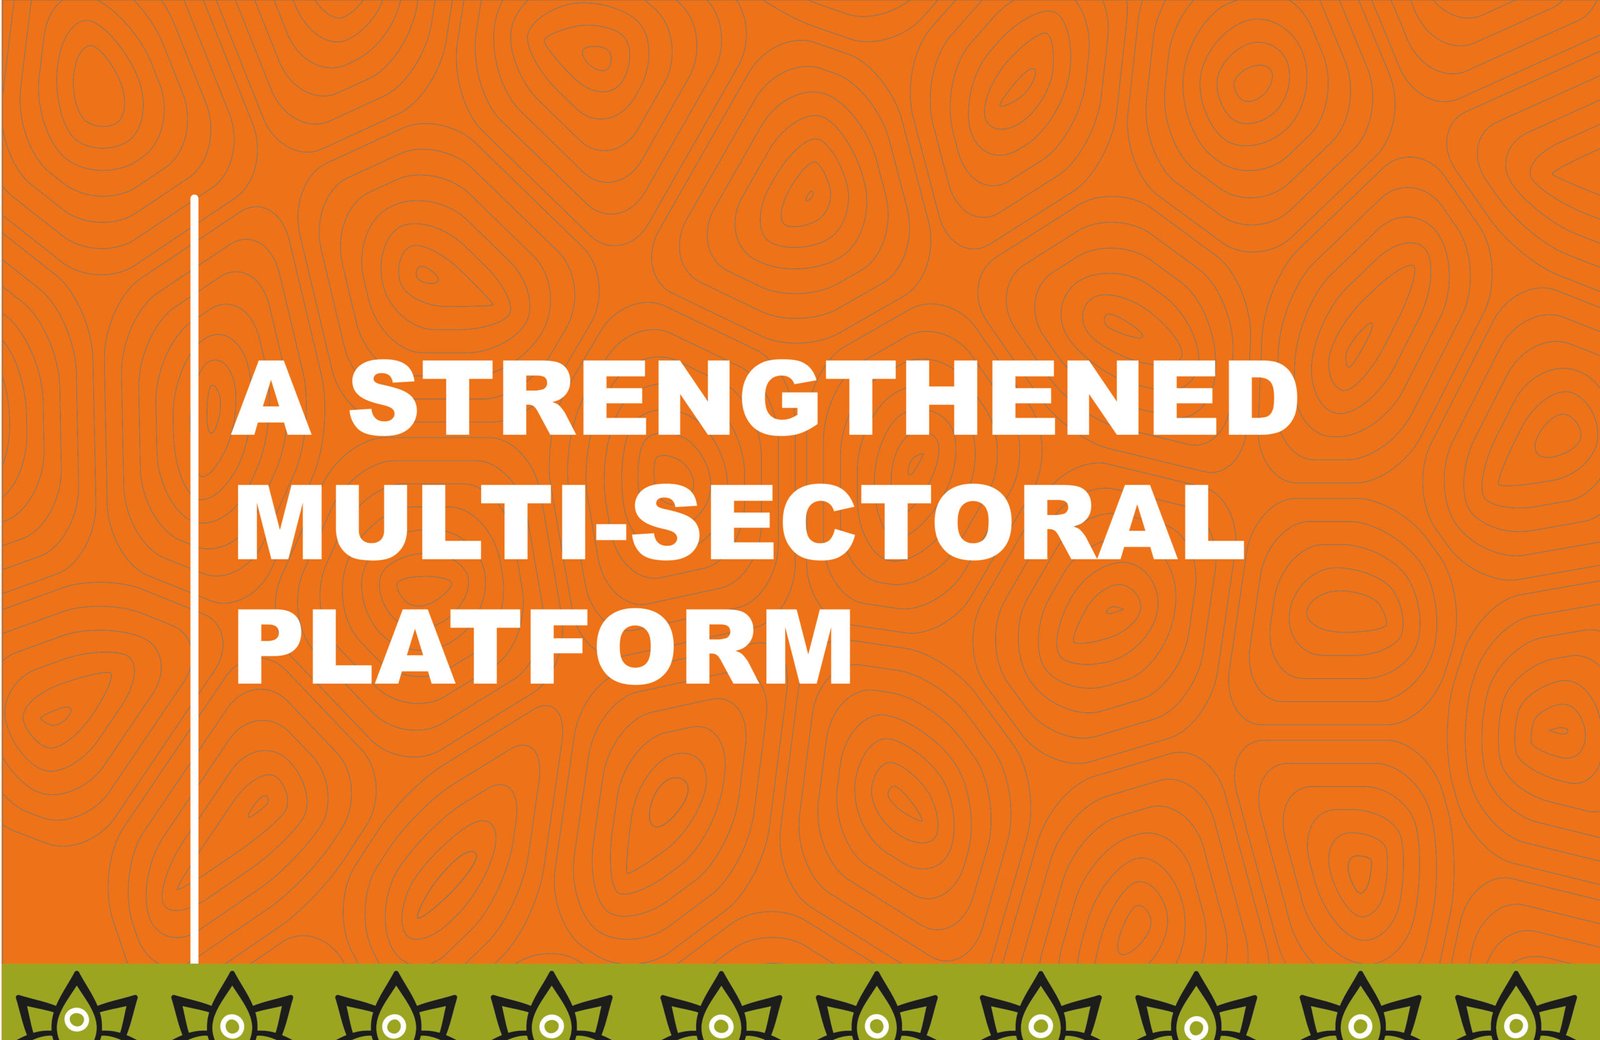 A STRENGTHENED MULTI-SECTORAL PLATFORM AT GOVERNMENT LEVEL.